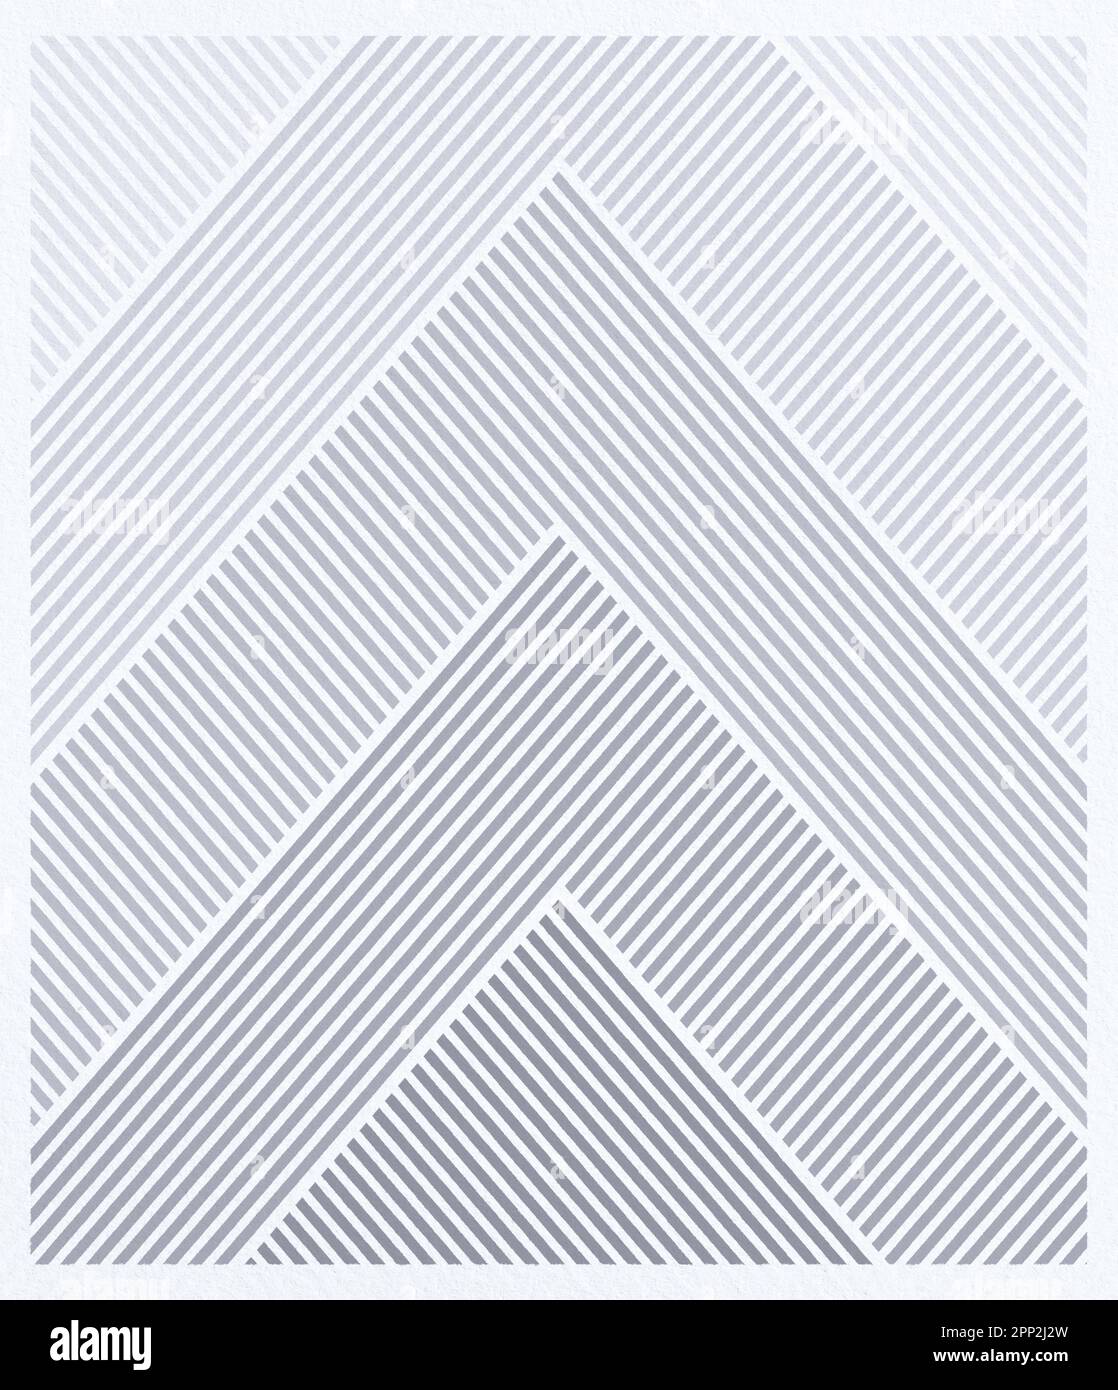 Fading triangles made of diagonal gray lines on a textured white paper background. Abstract geometric and graphic triangular pattern background. Stock Photo